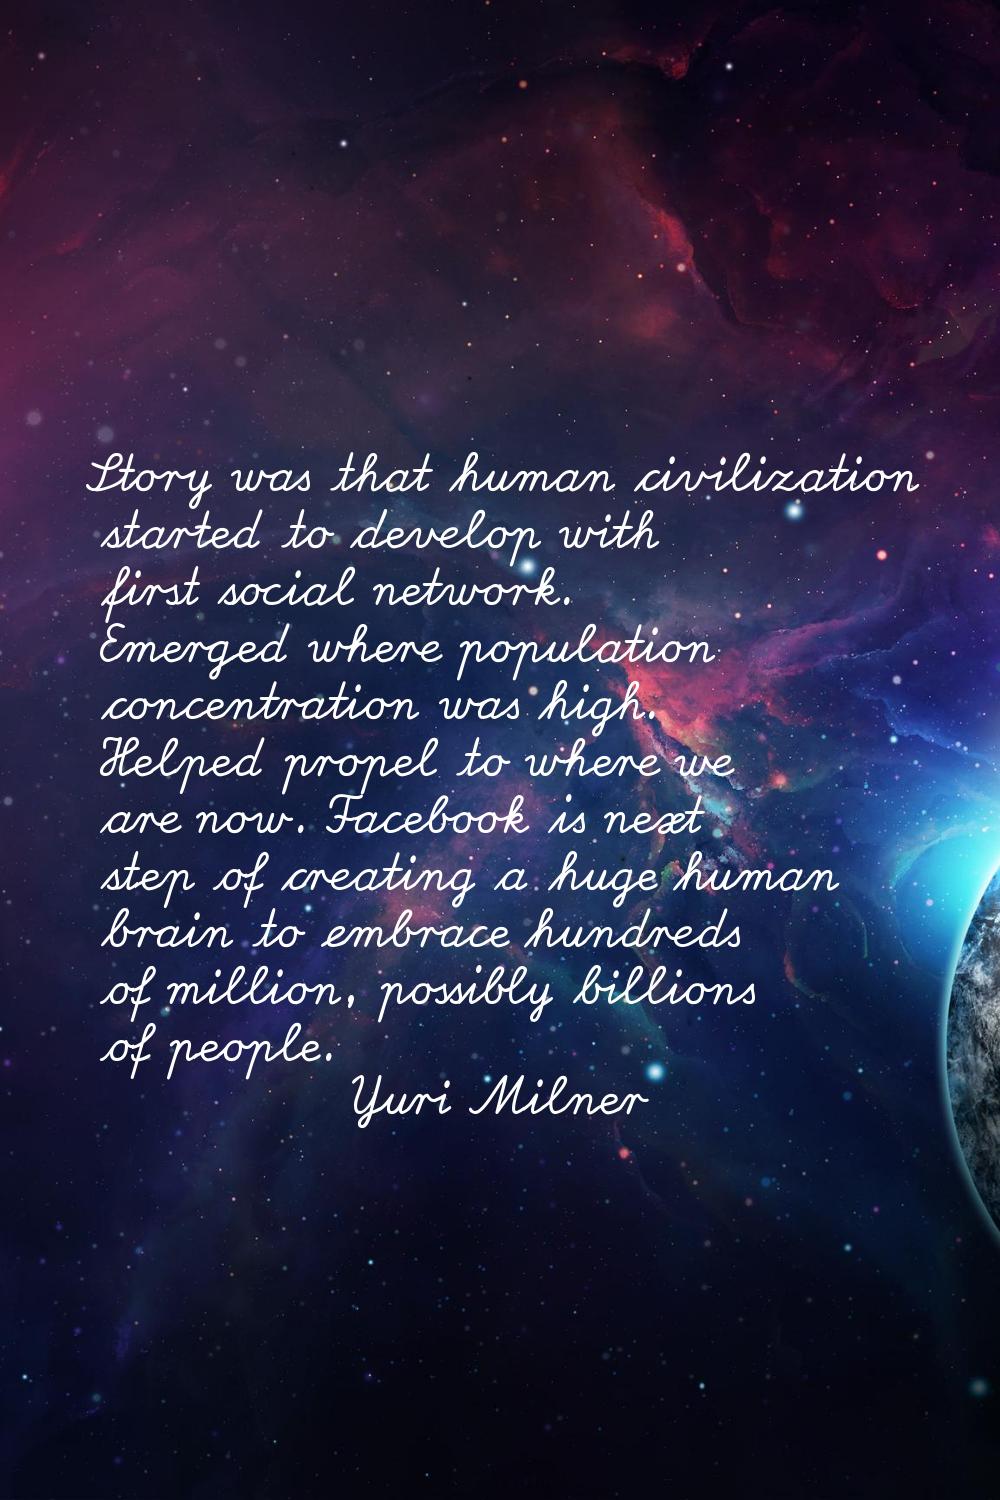 Story was that human civilization started to develop with first social network. Emerged where popul